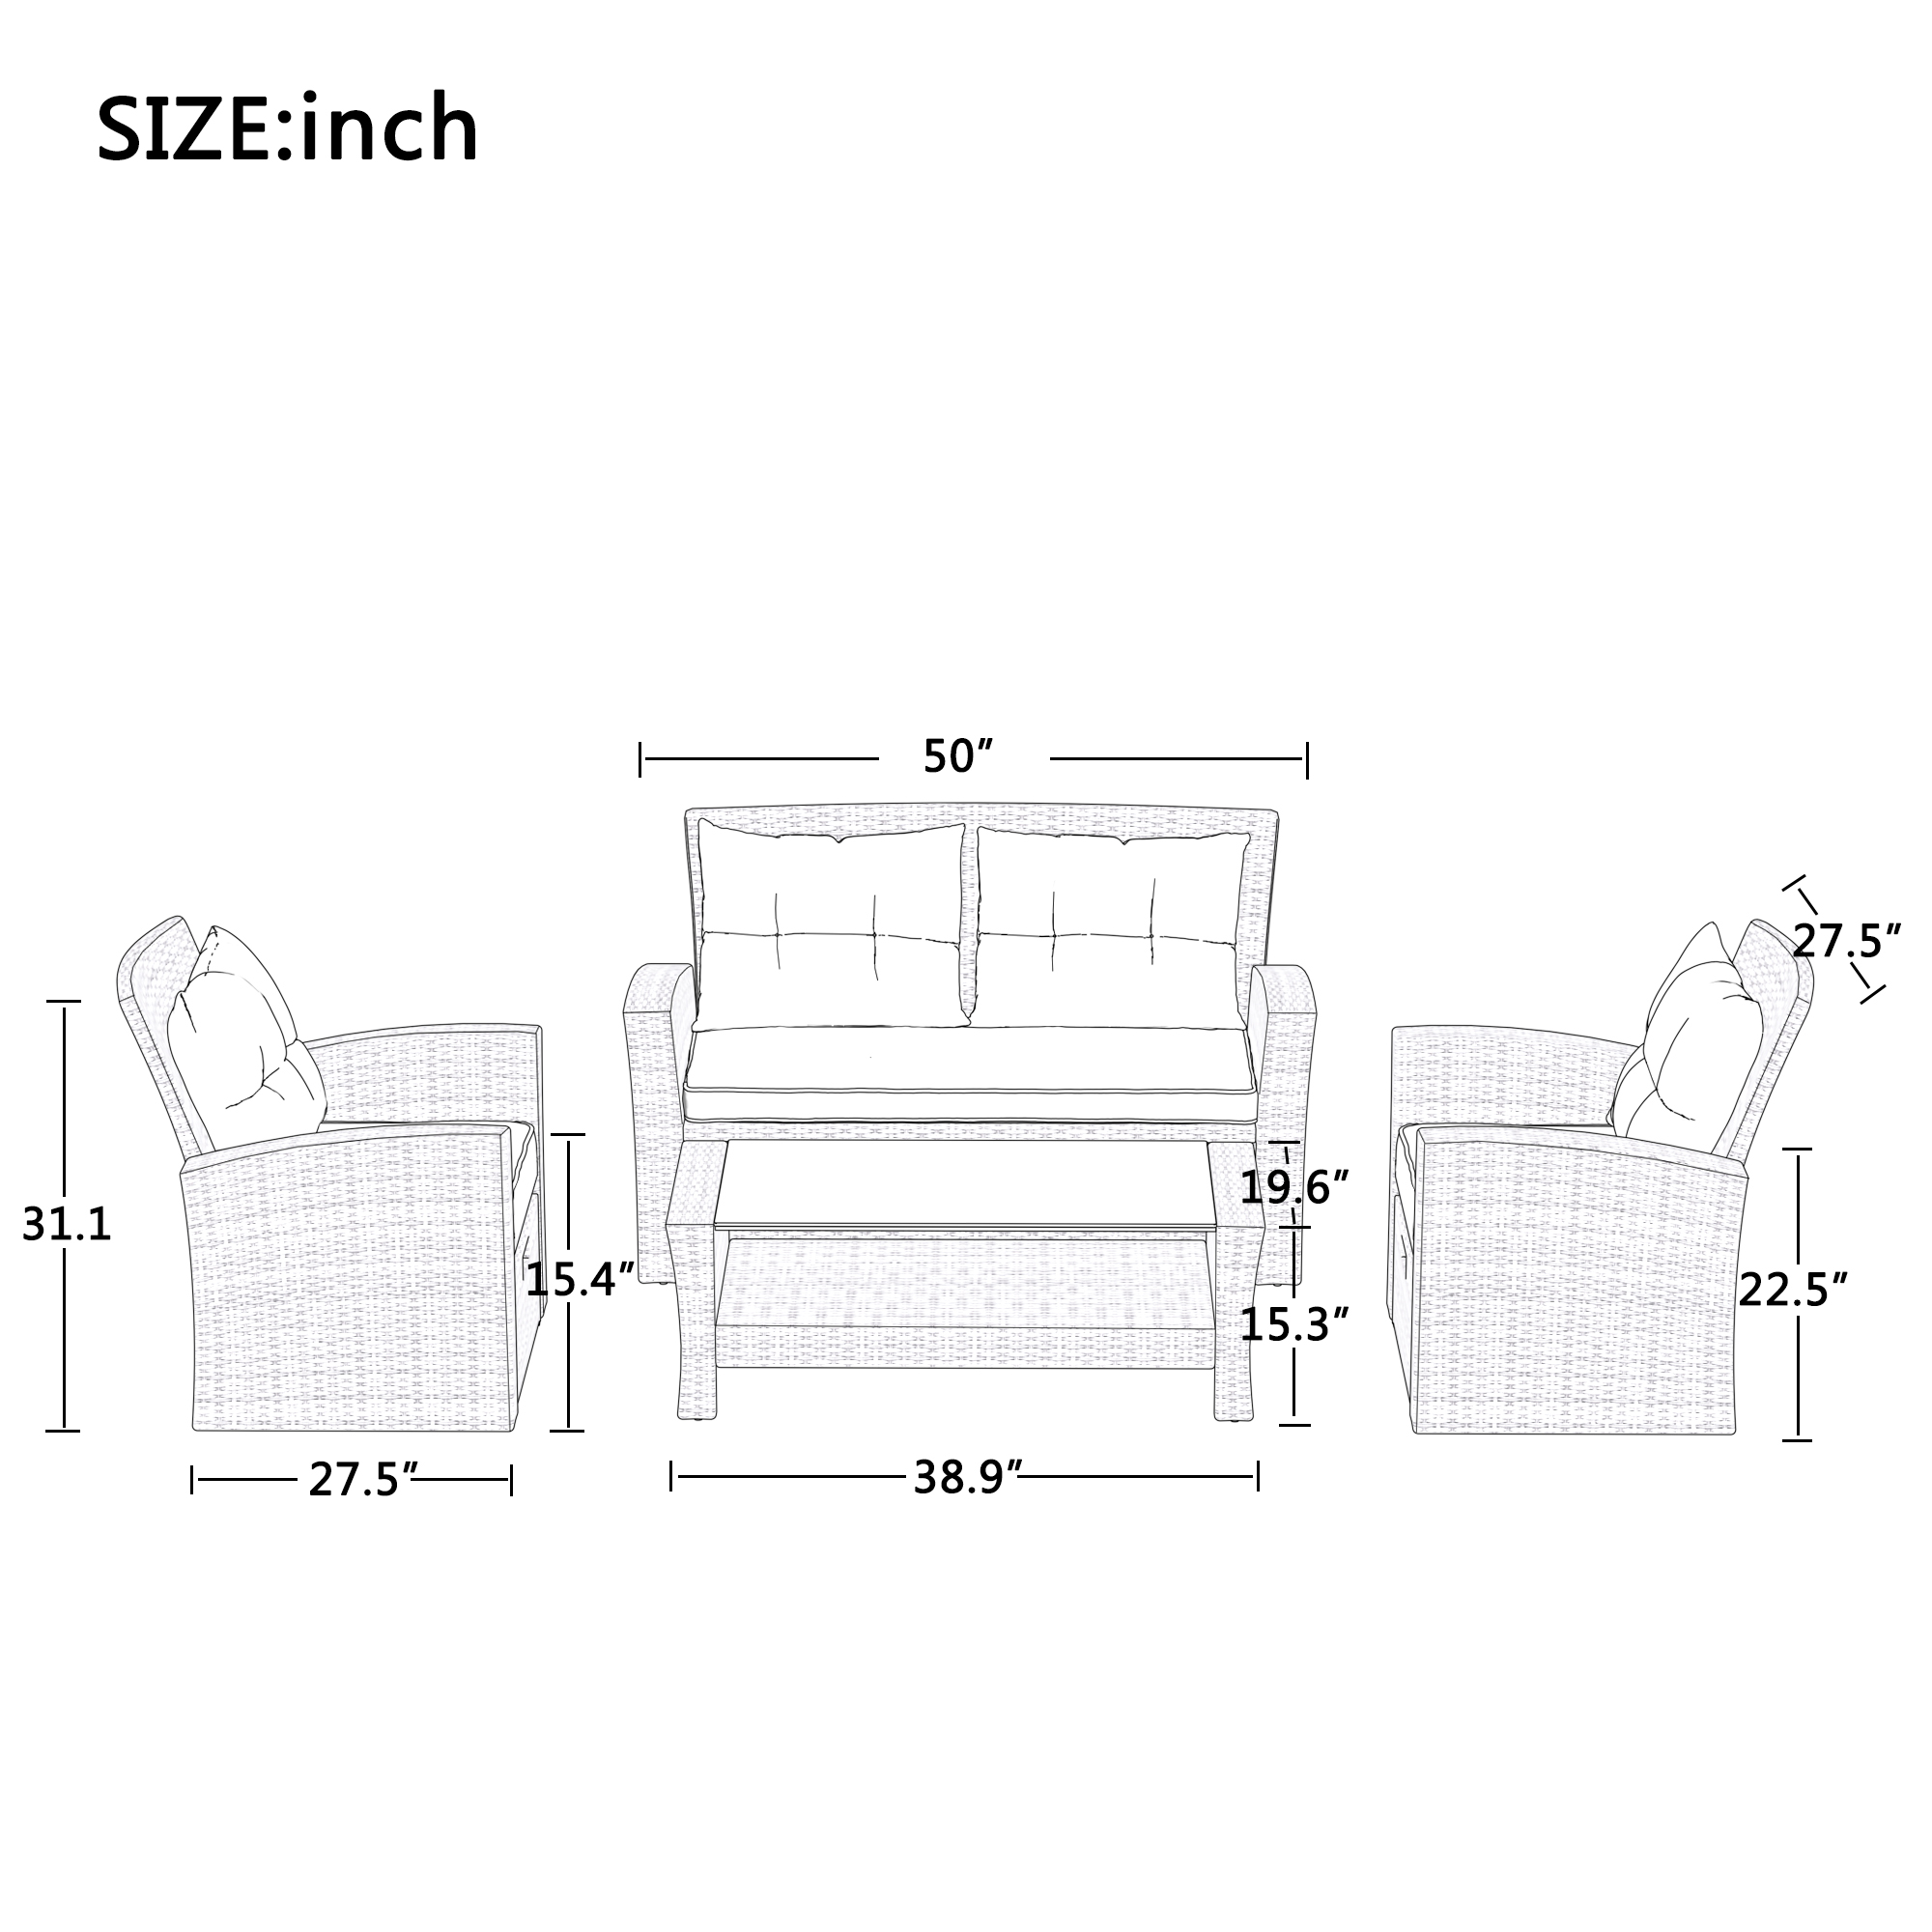 SESSLIFE 6 Piece Wicker Patio Furniture Set, Outdoor Sectional Sofa with Table, Ottoman and Washable Cushions, Patio Seating Sets for Lawn Porch Poolside - image 3 of 9